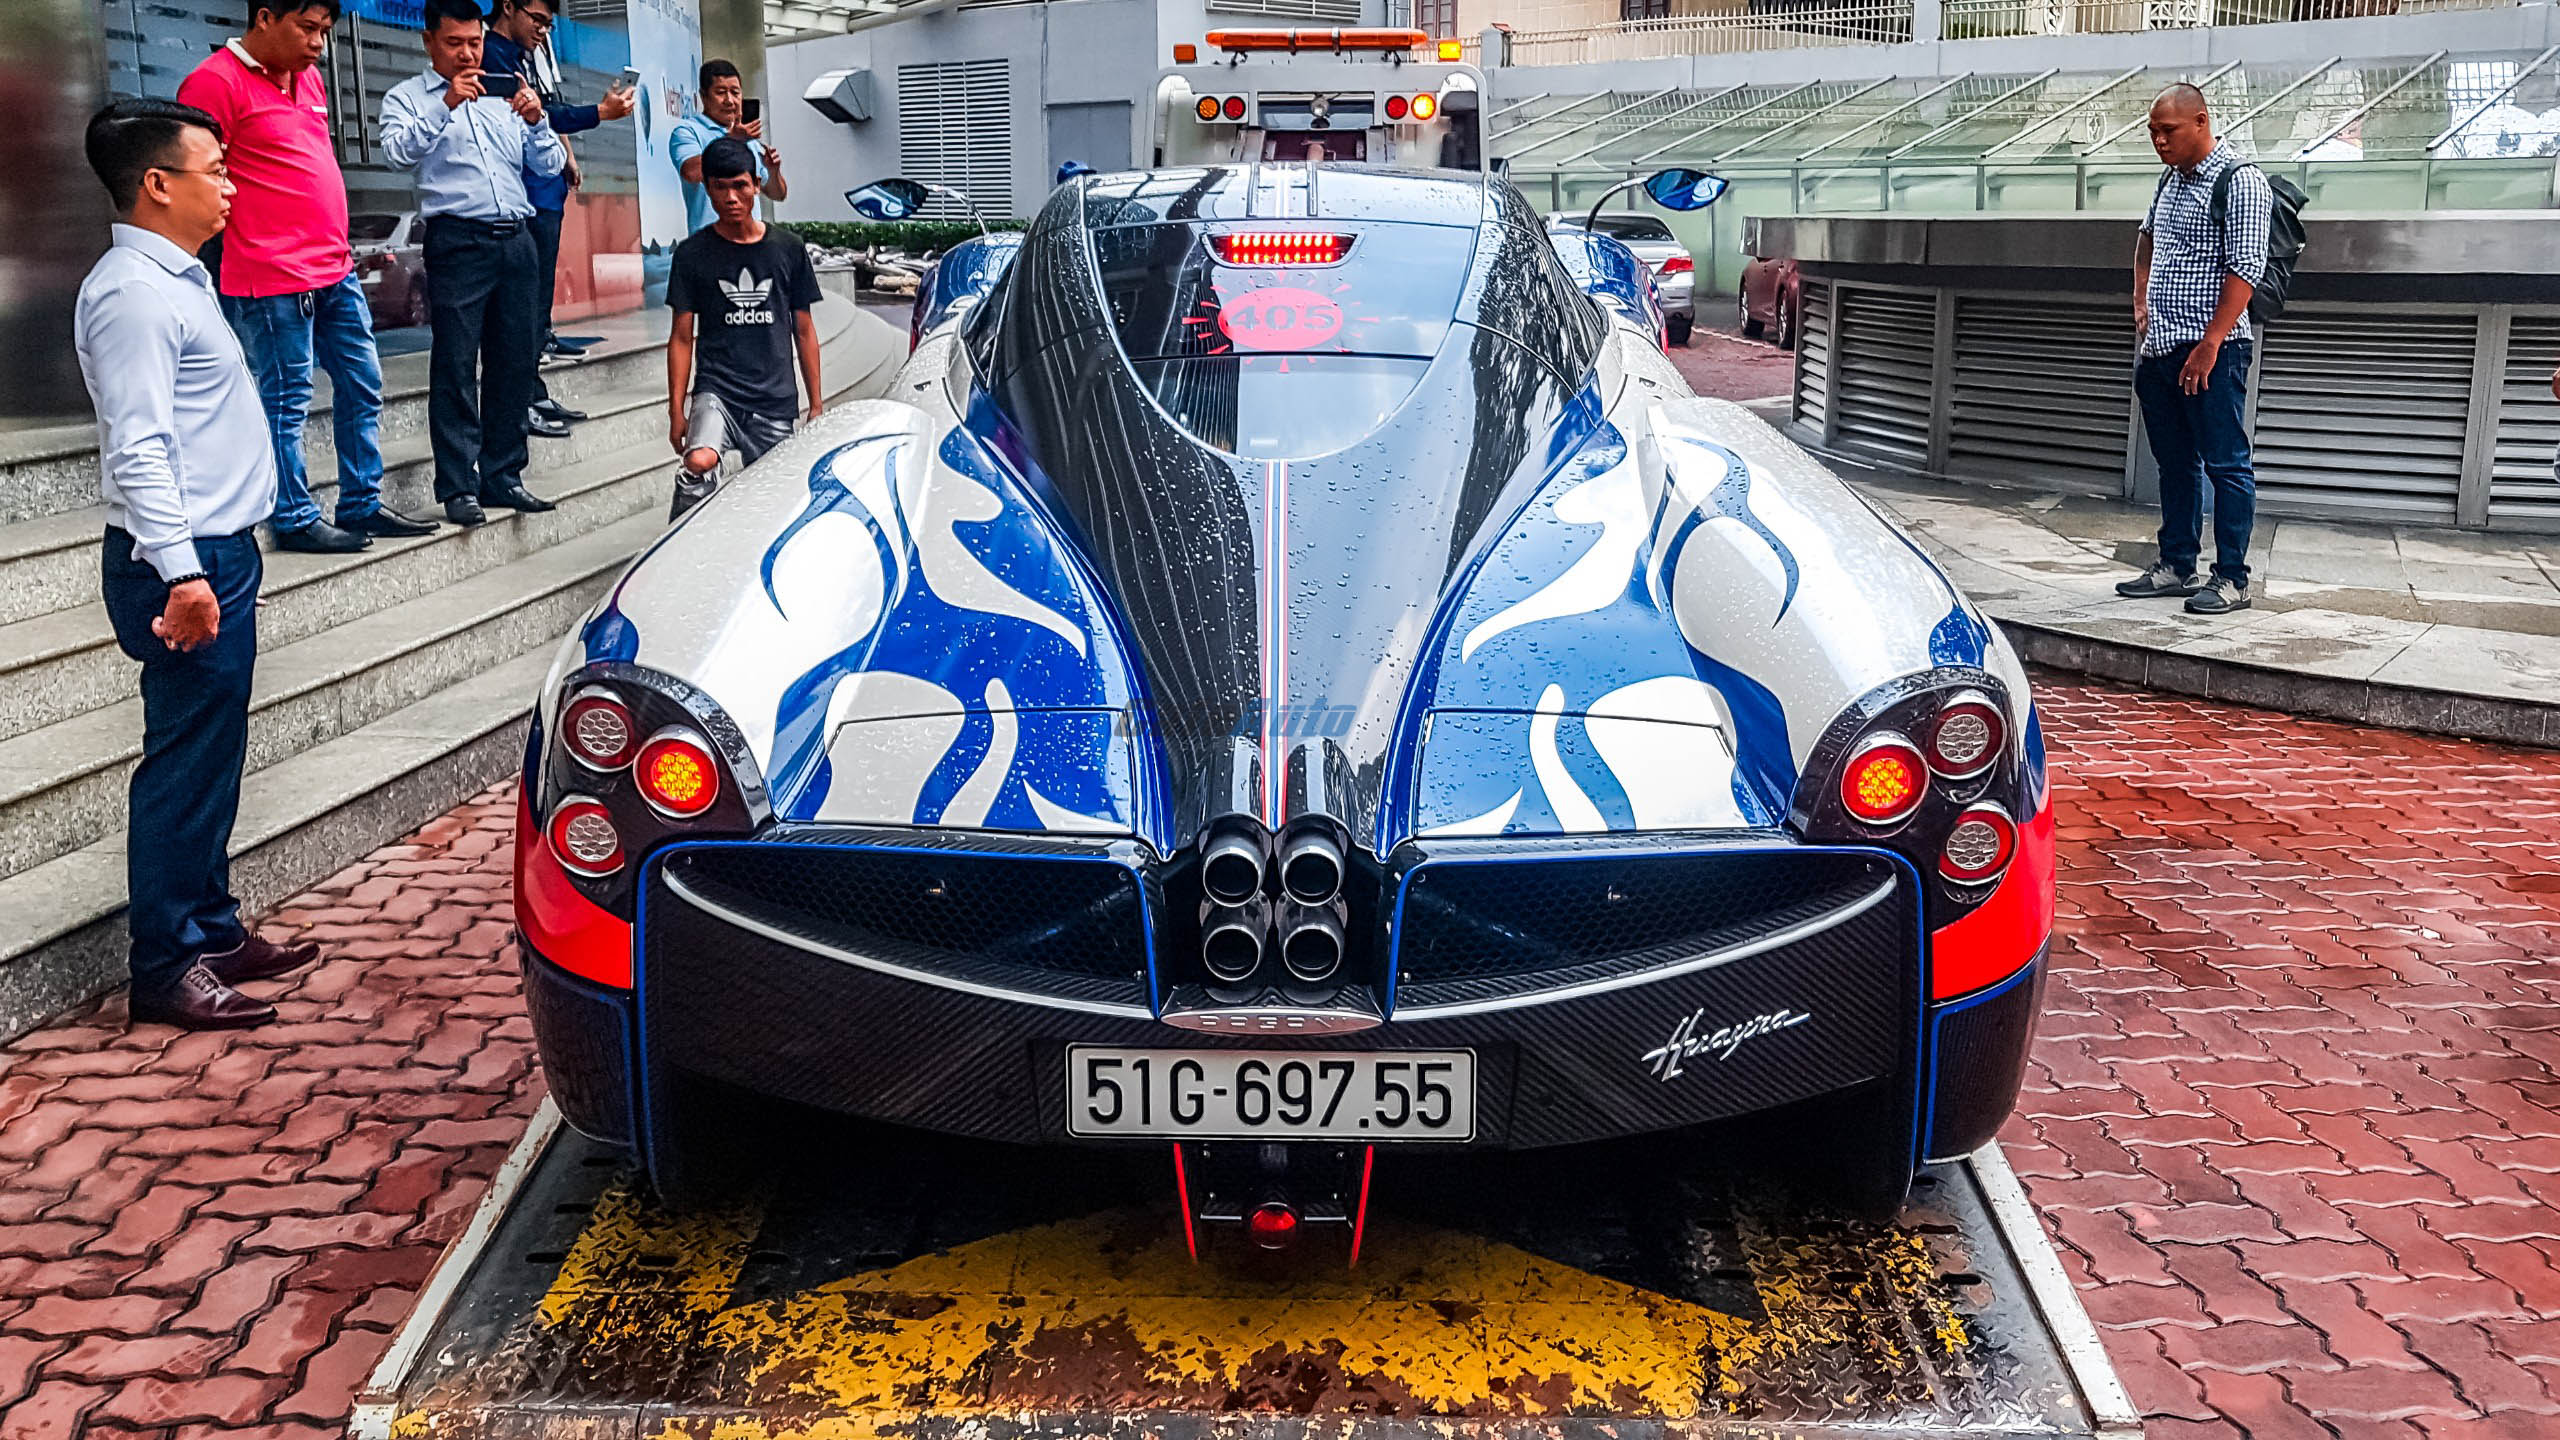 paganihuayra-cafeautovn-24